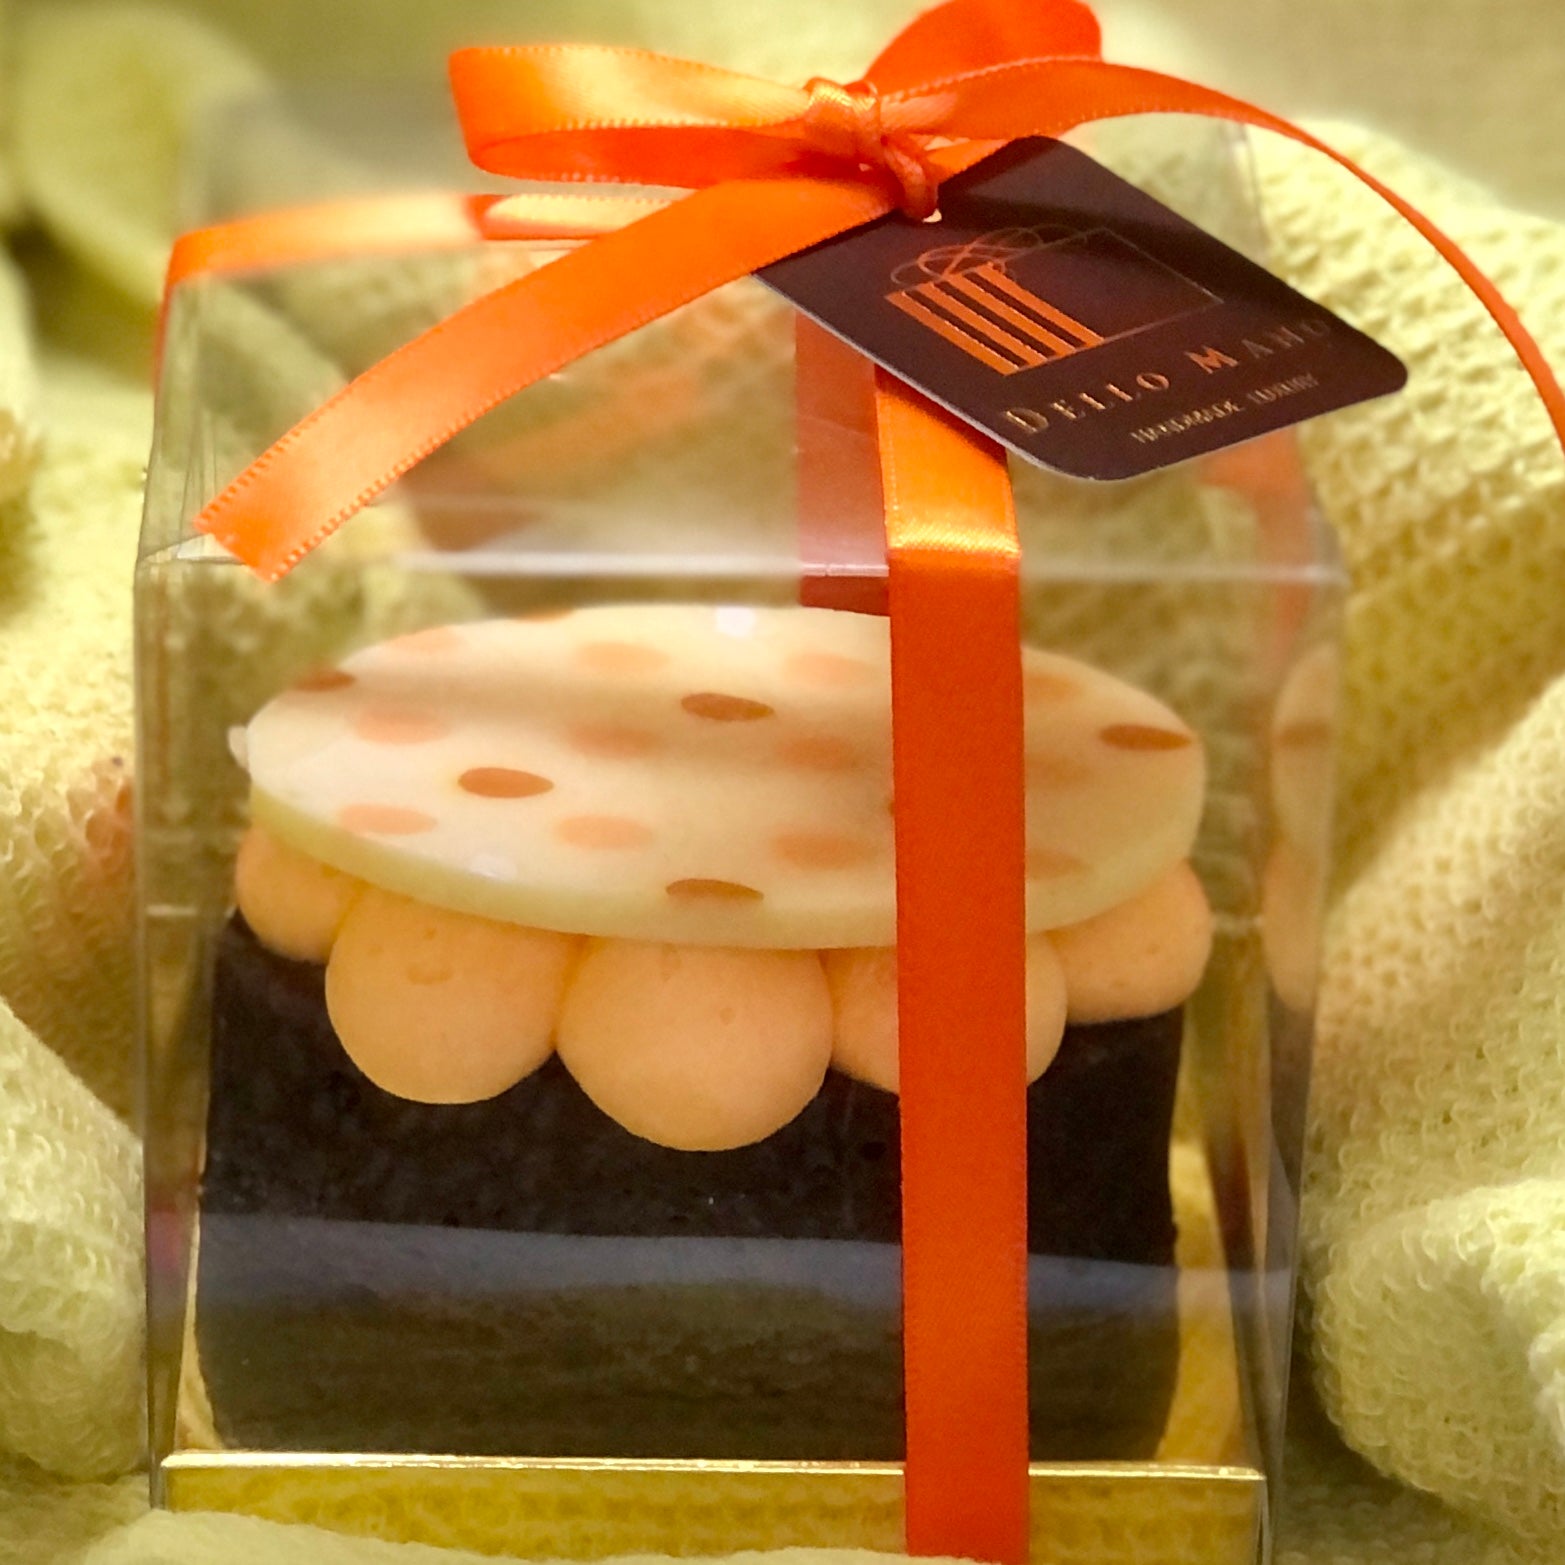 The side view of an Easter Egg Brownie in a gift box. The brownie is topped with pastel orange cream and finished with white chocolate spotted chocolate.